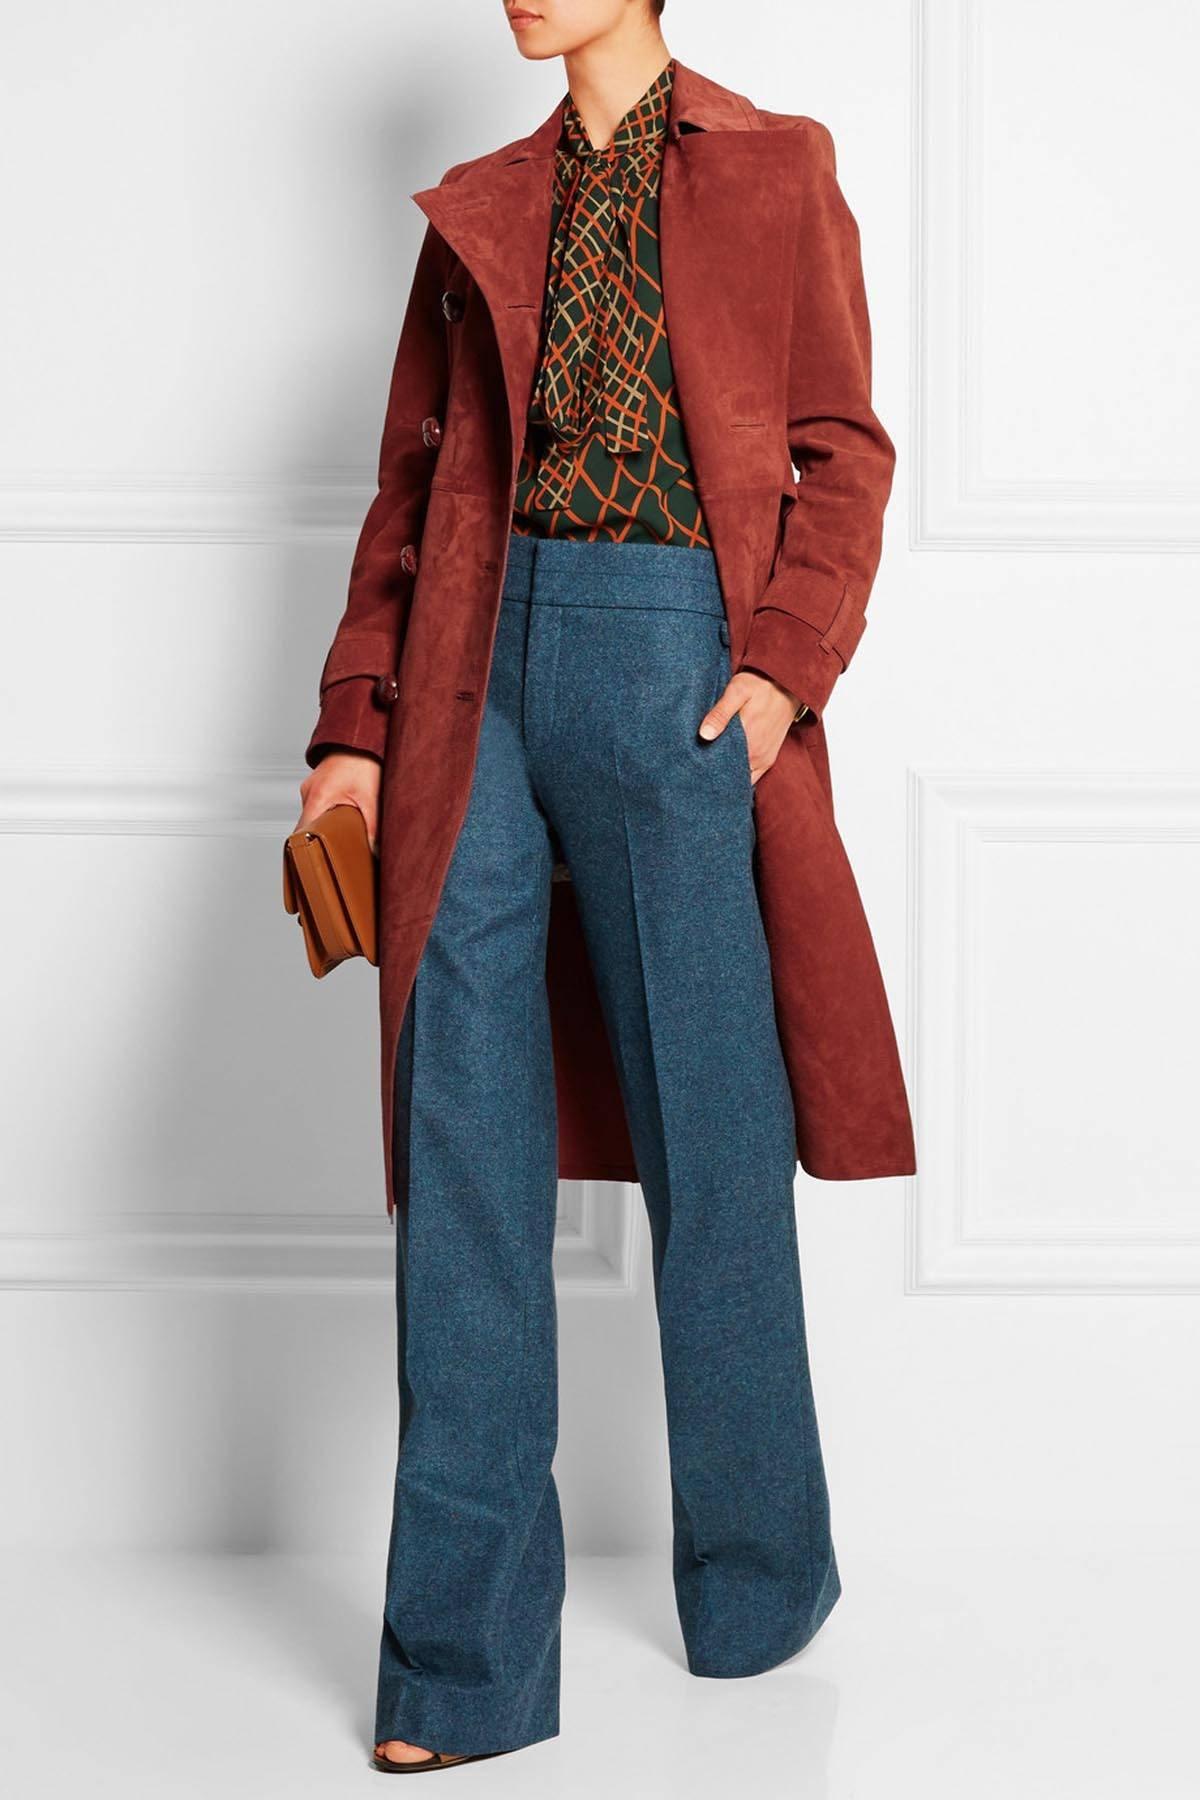 New GUCCI Suede Leather Trench Coat
Coat Has Been Tailored from Luxuriously Weighty Suede in Slim-Fitting Silhouette
Italian sizes 40,  Color - Brick Red (Designer Color - Roasted Sand).
100% Suede Leather (calf), Finished with Distinctive Braided